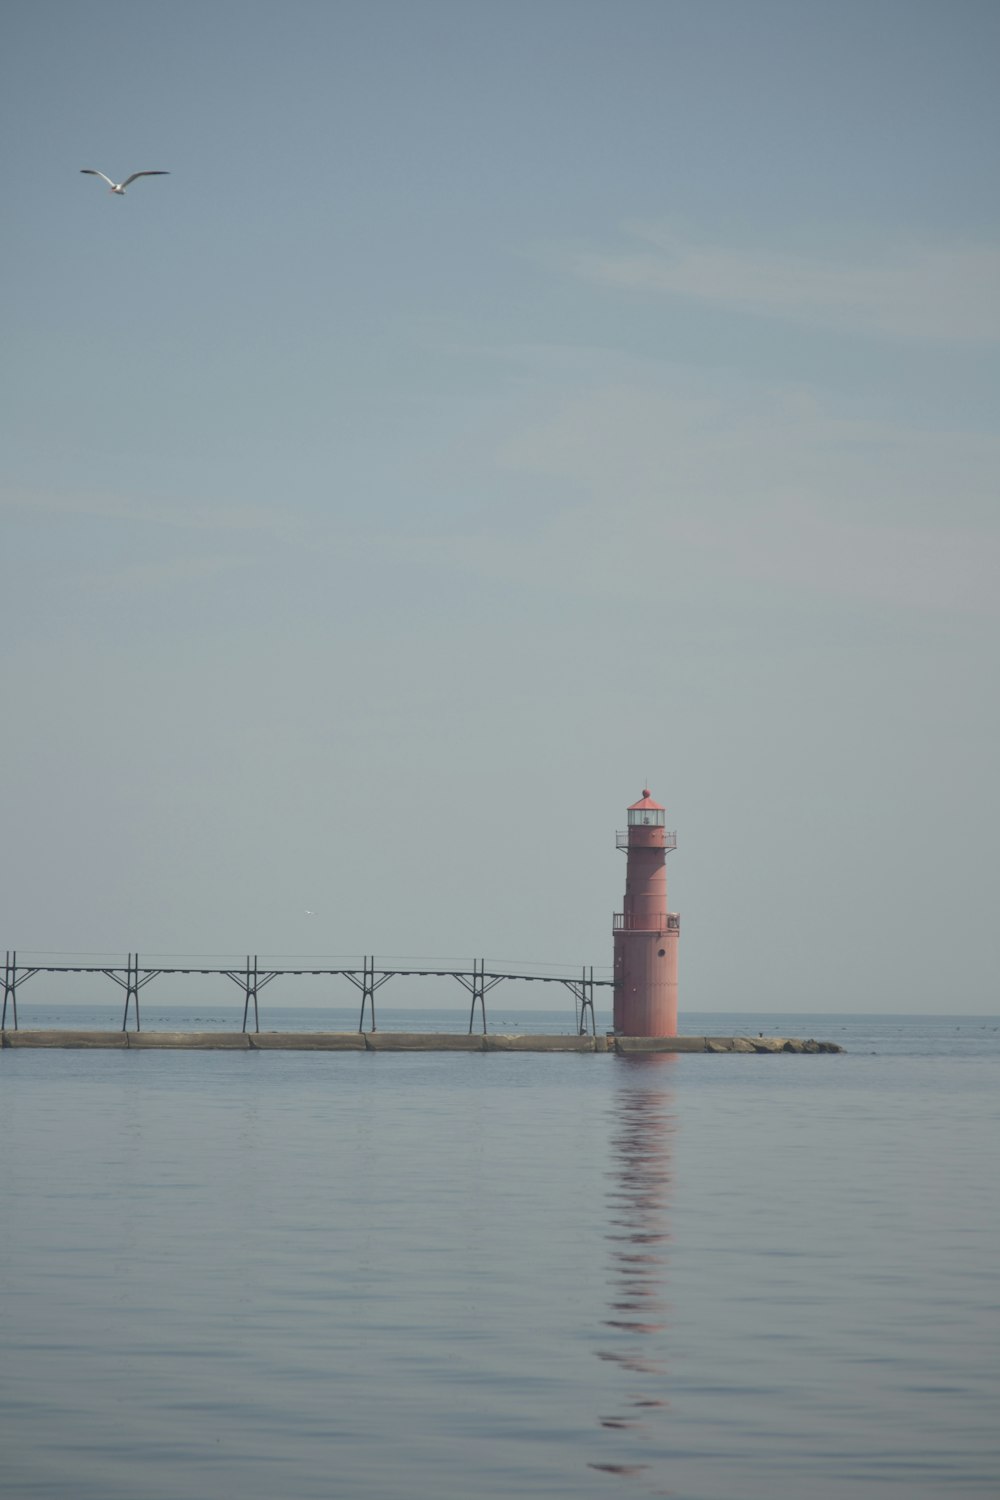 a light house in the middle of a body of water